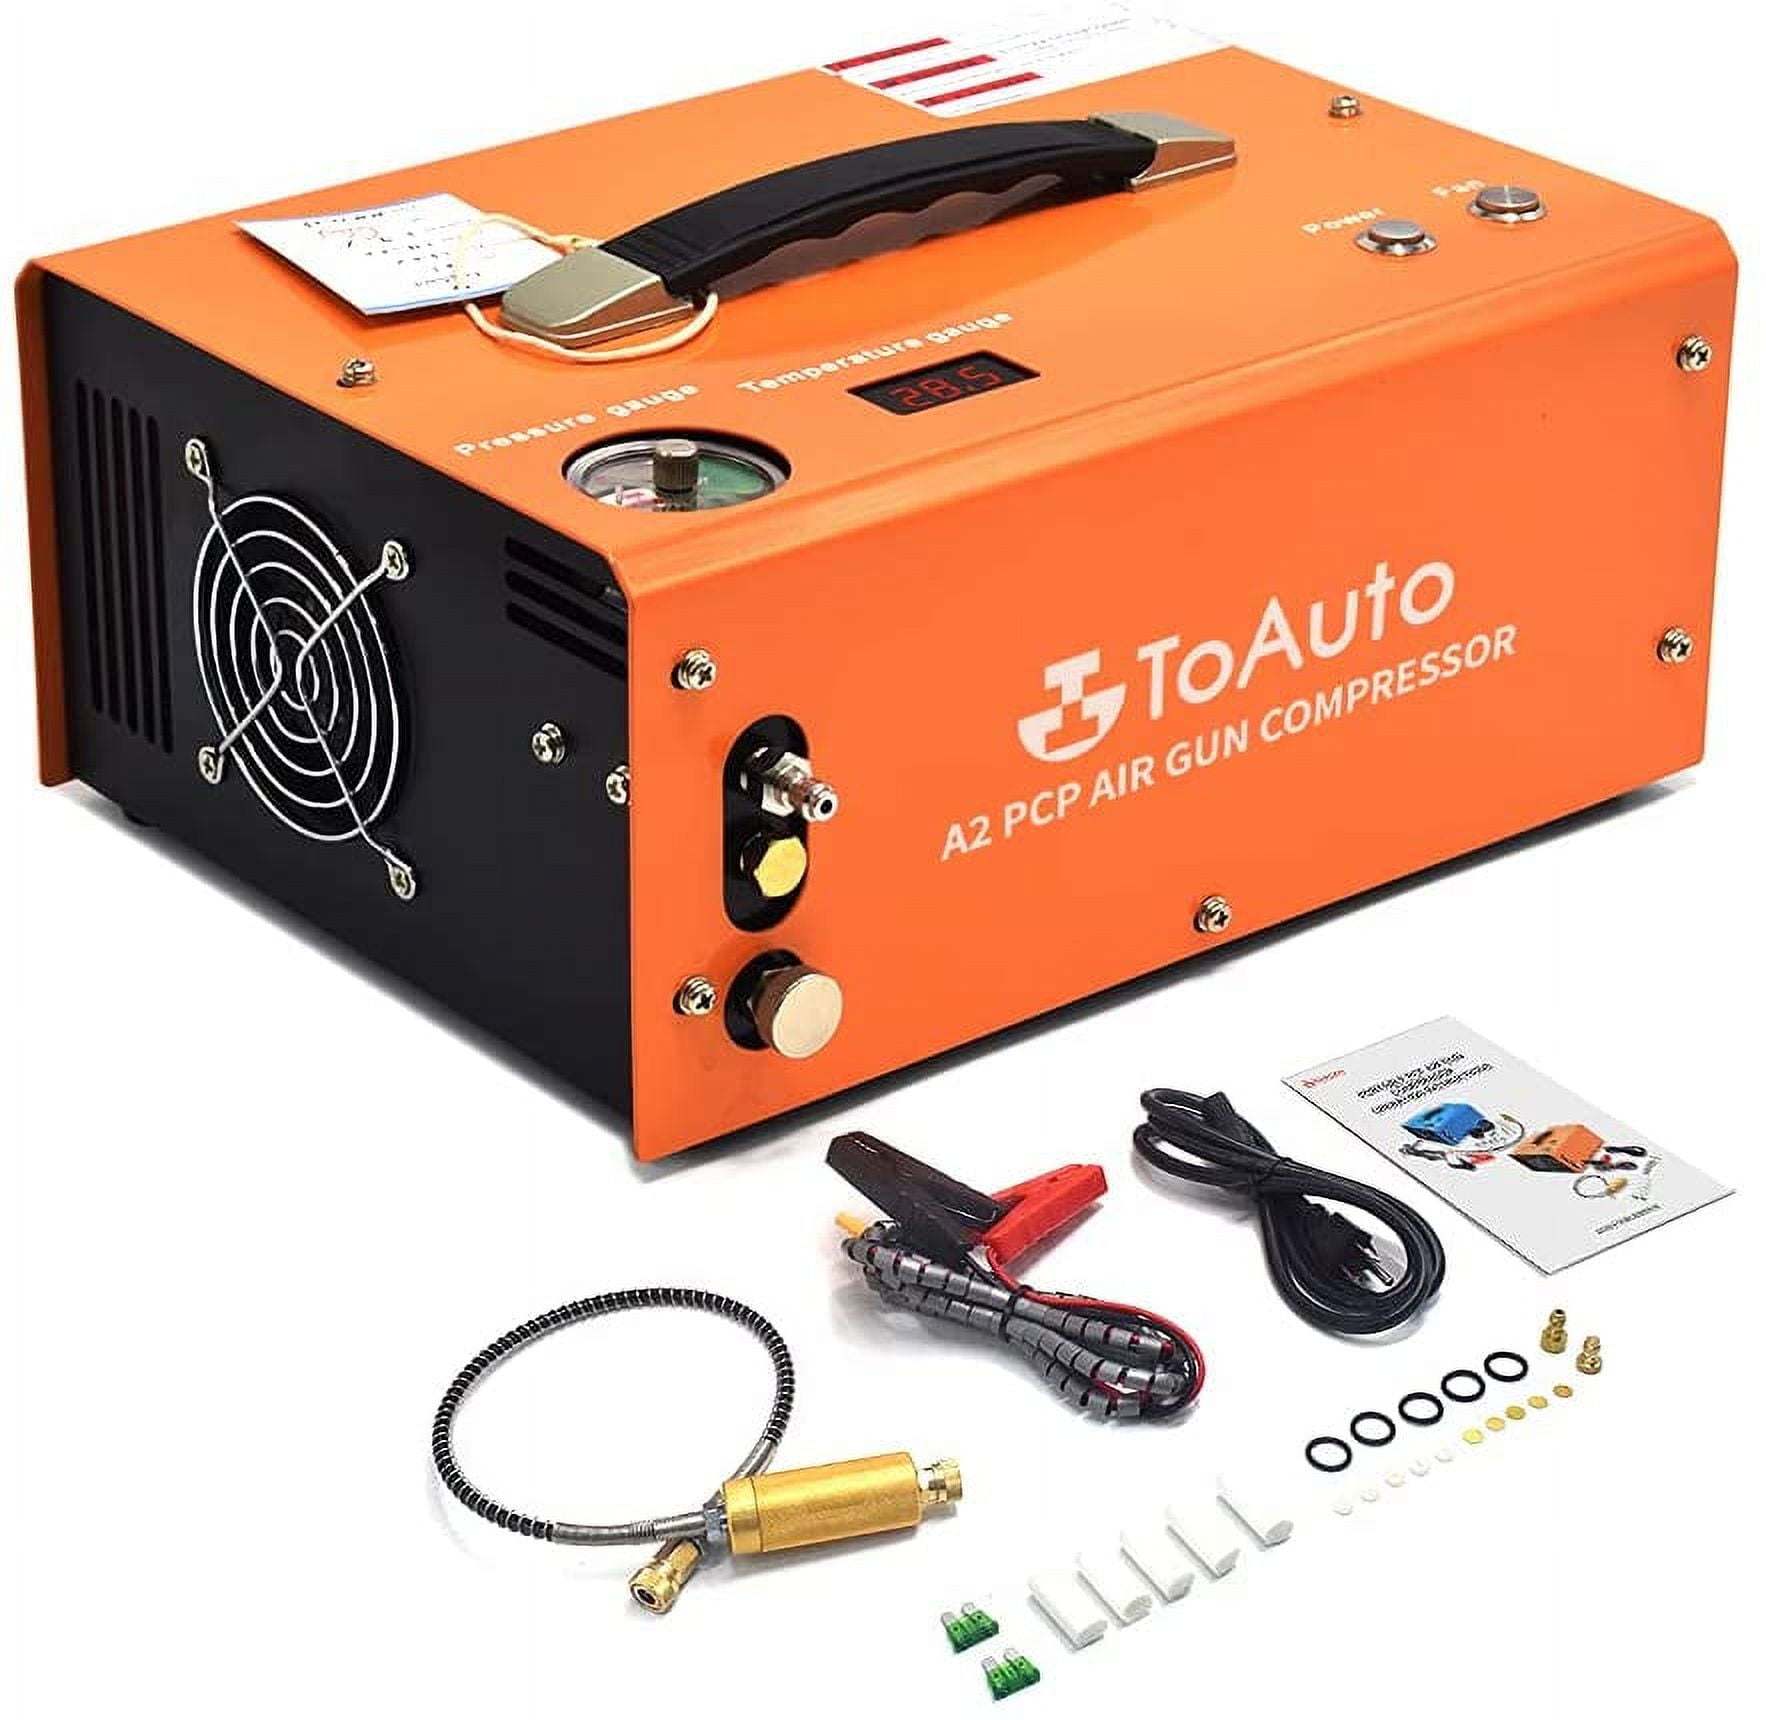 How to use ToAuto A1 PCP AIR Compressor? Portable air pump use tutorial and  common problems solve. 